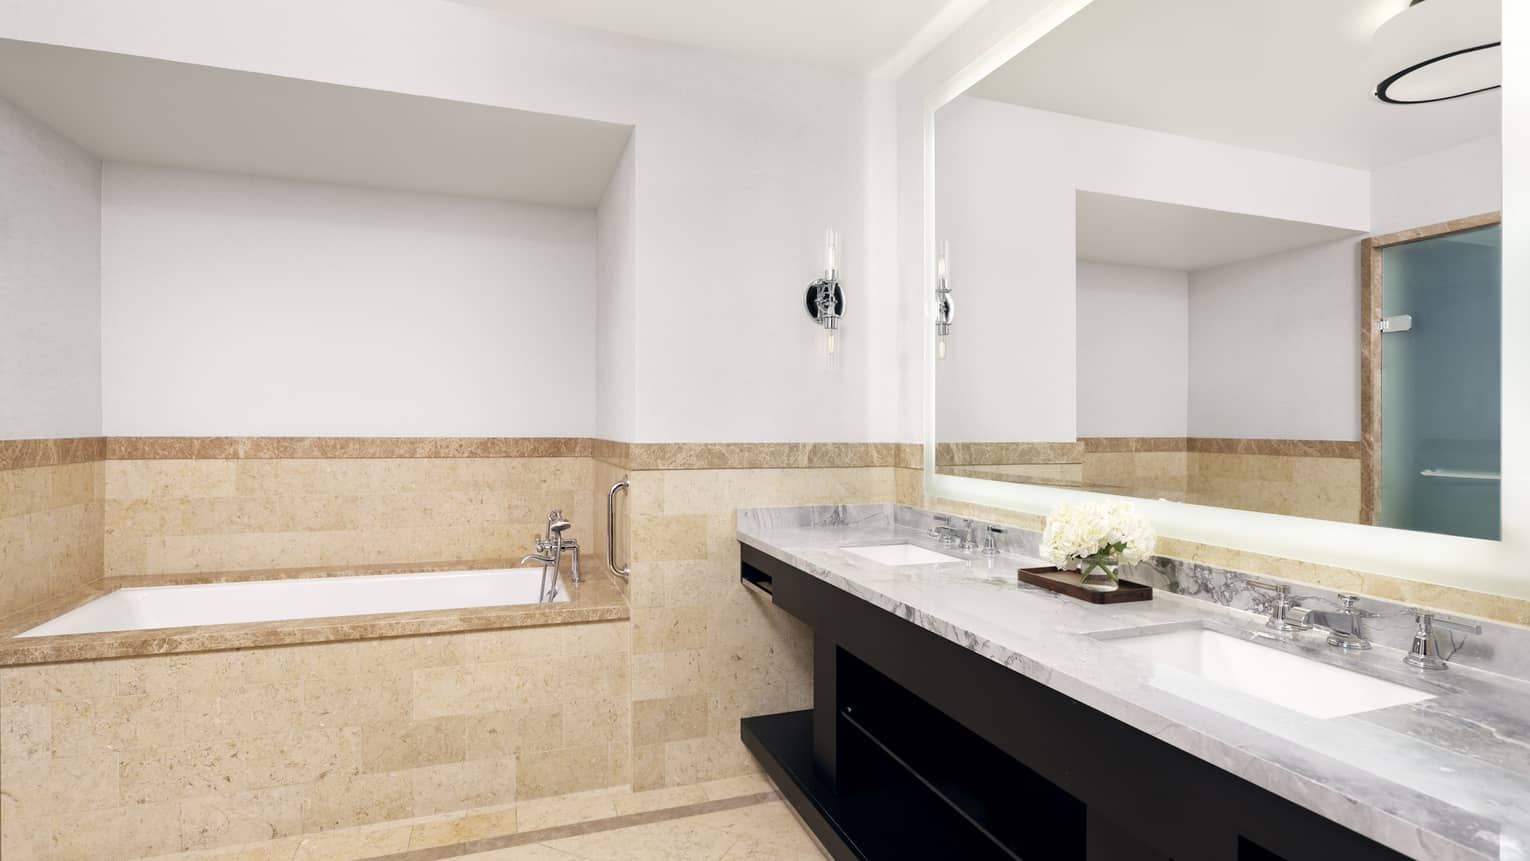 Bathroom with built-in tub, limestone walls and floor, marble double vanity and black wooden cabinets